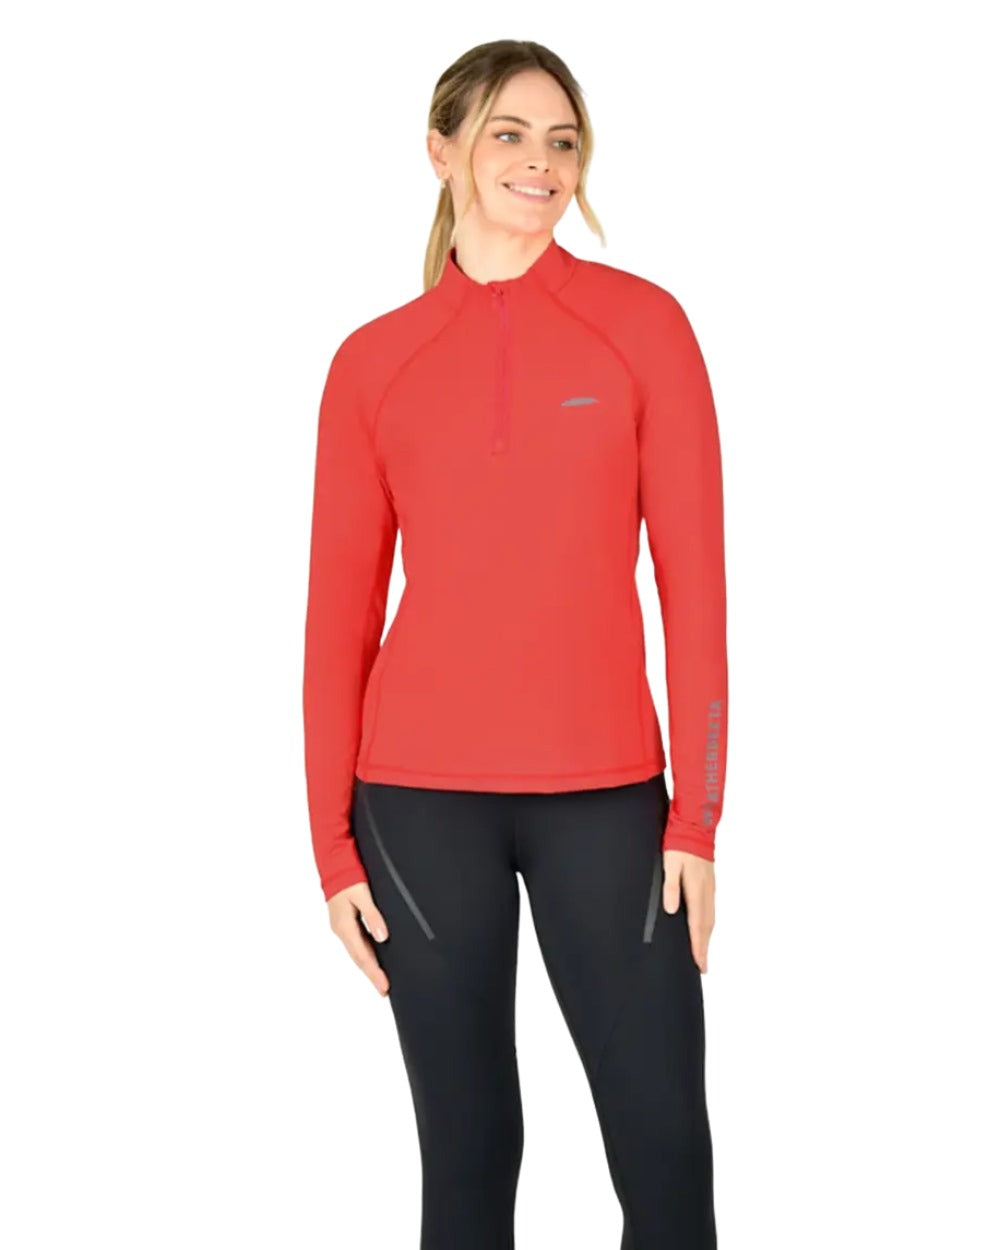 Bittersweet Red coloured WeatherBeeta Prime Long Sleeve Top on white background 